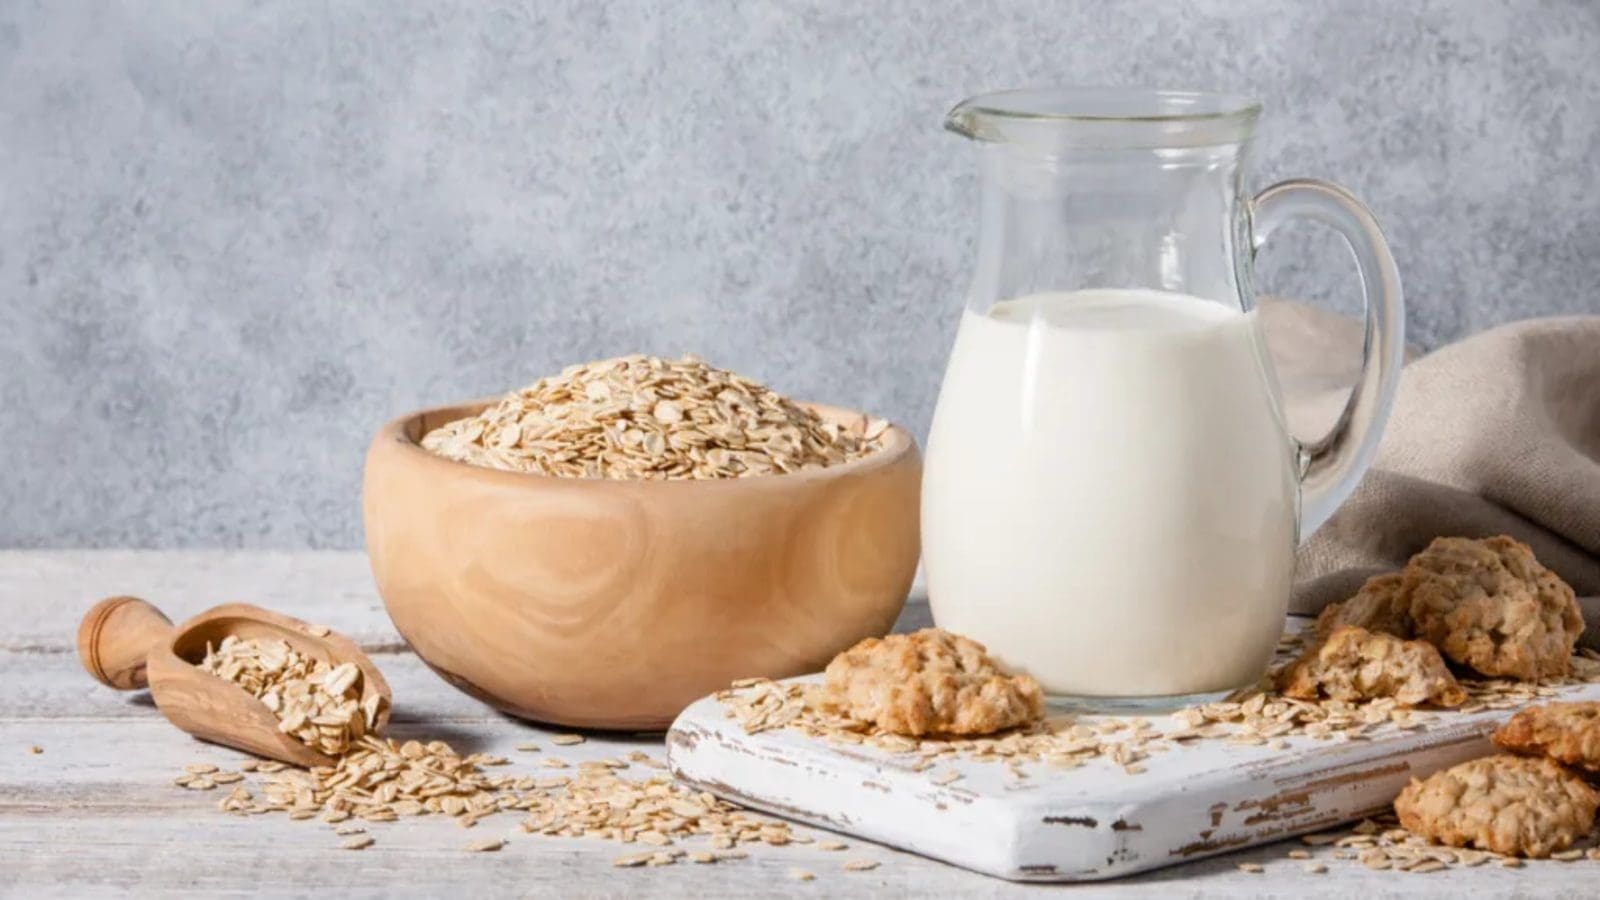 Royal DSM develops Delvo®Plant Go enzyme to reduce hydrolysis time by 30% in oat milk manufacturing